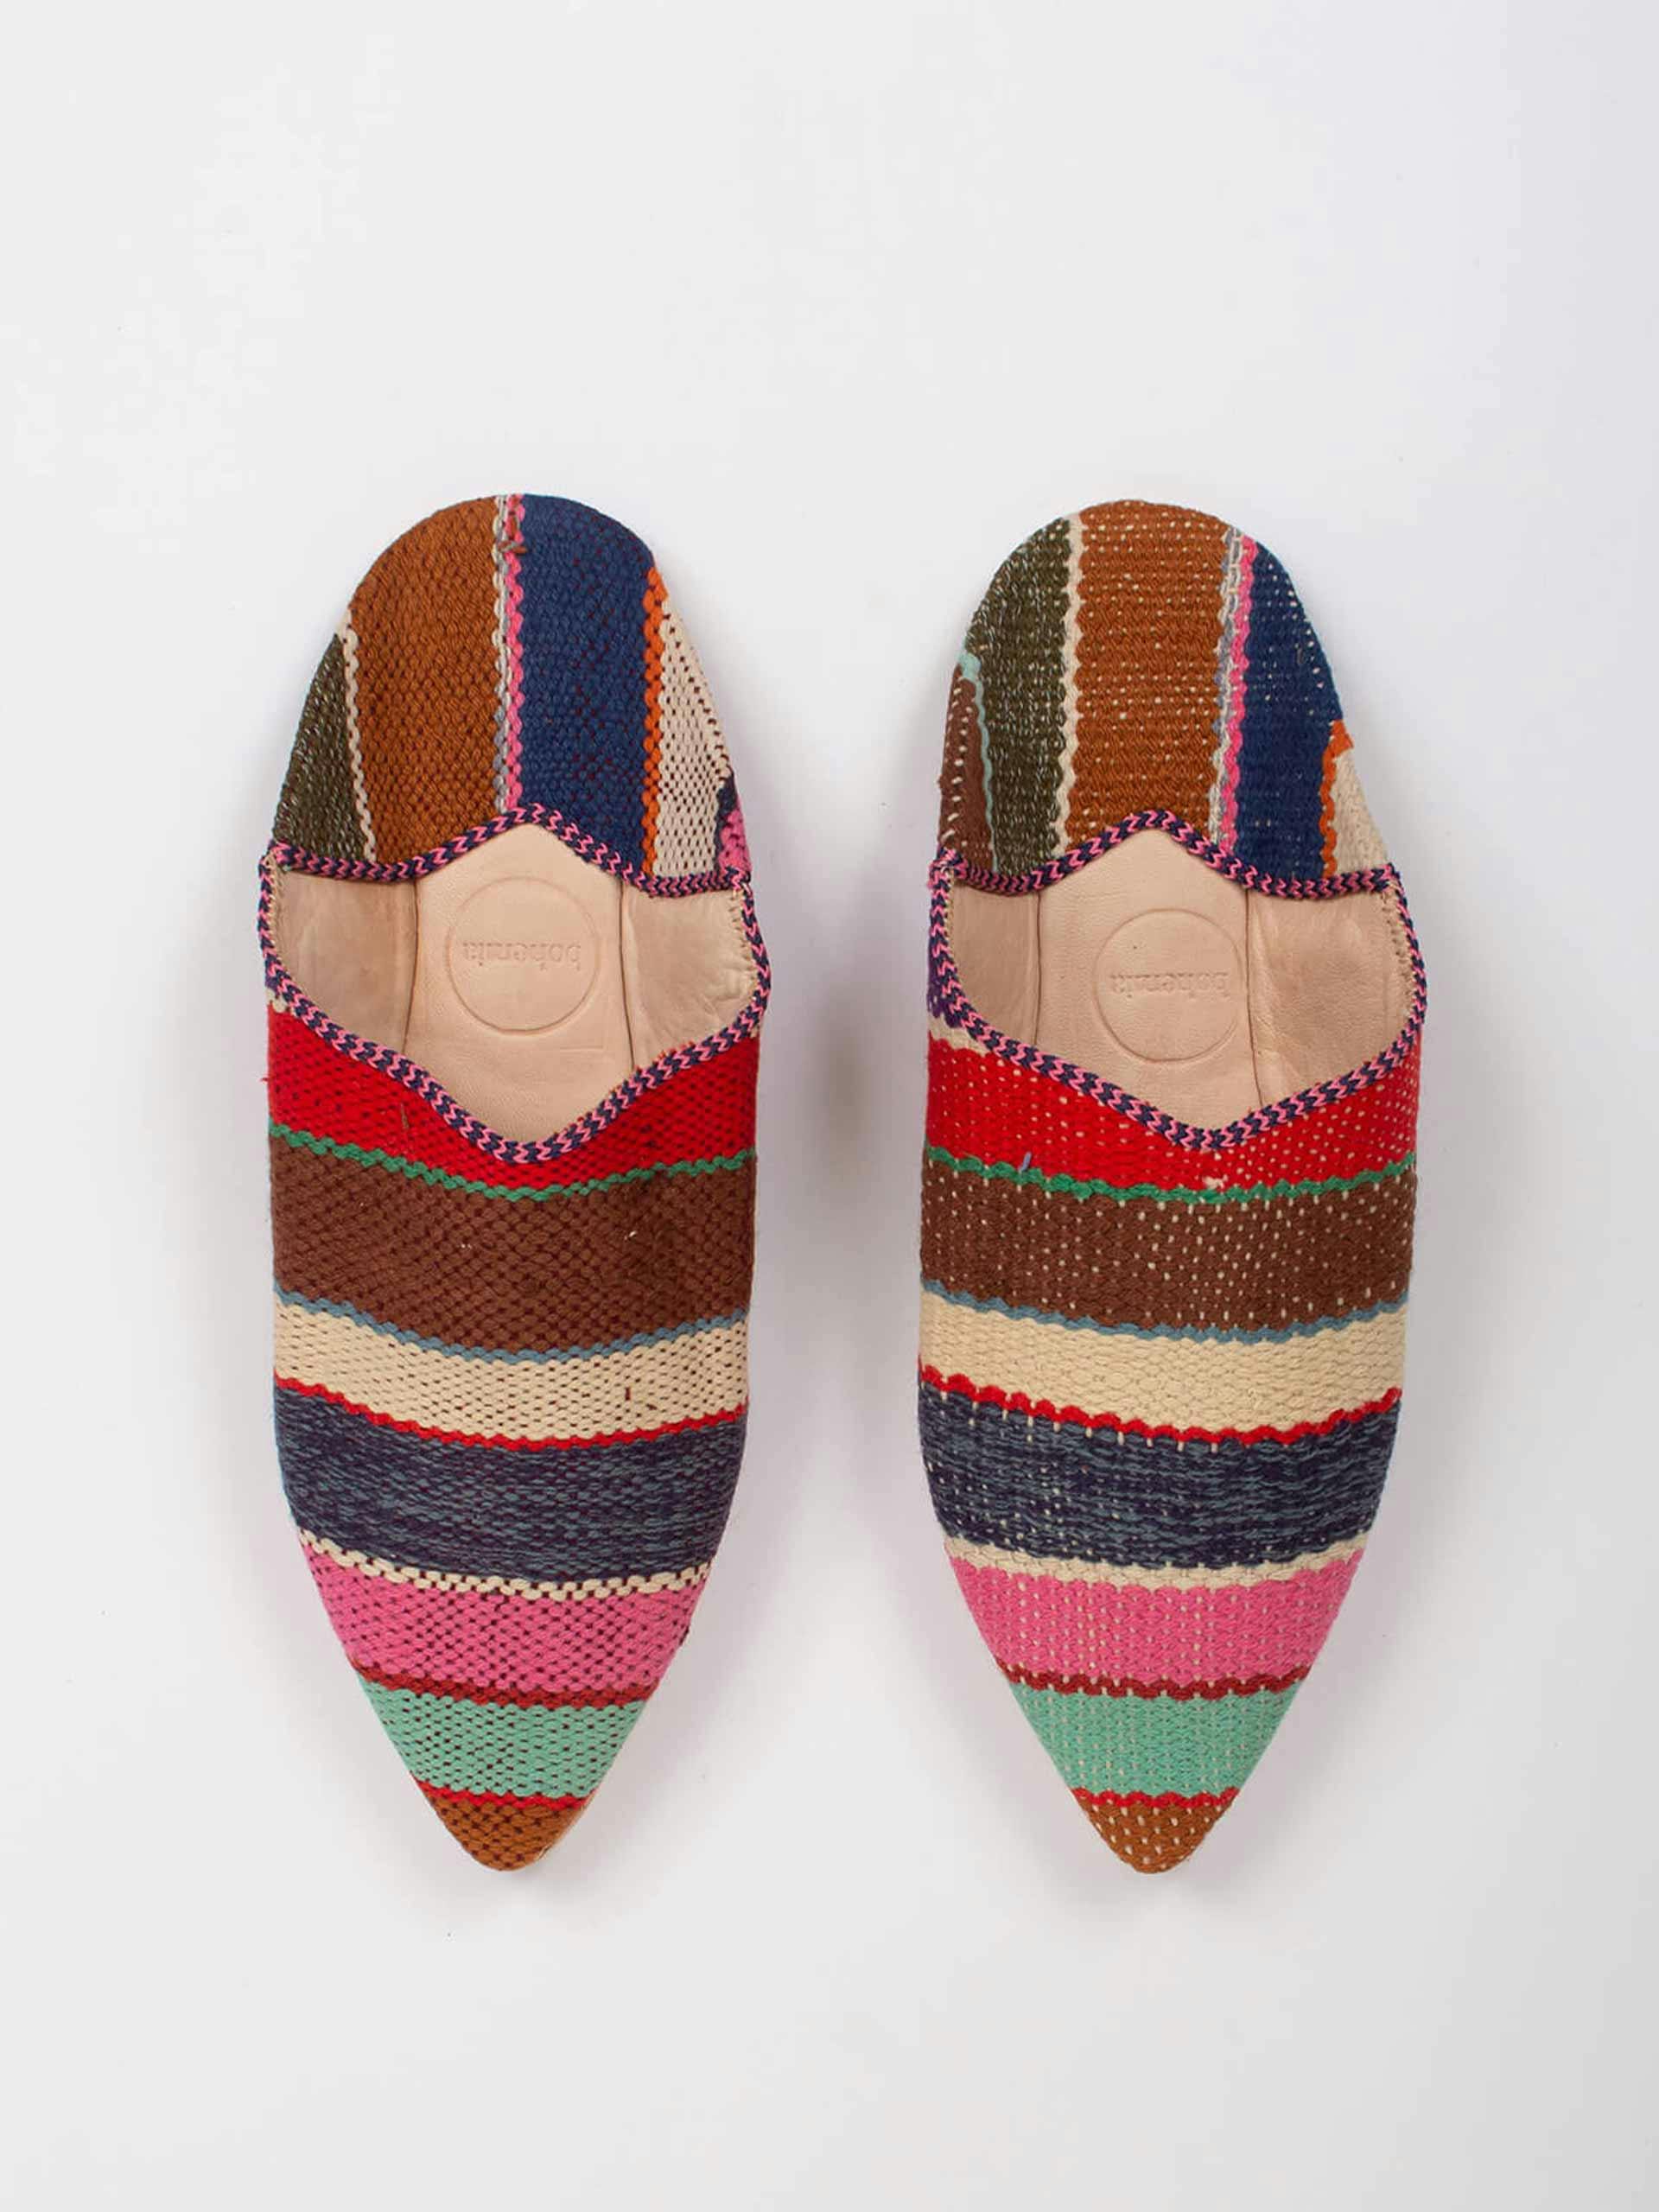 Striped slippers